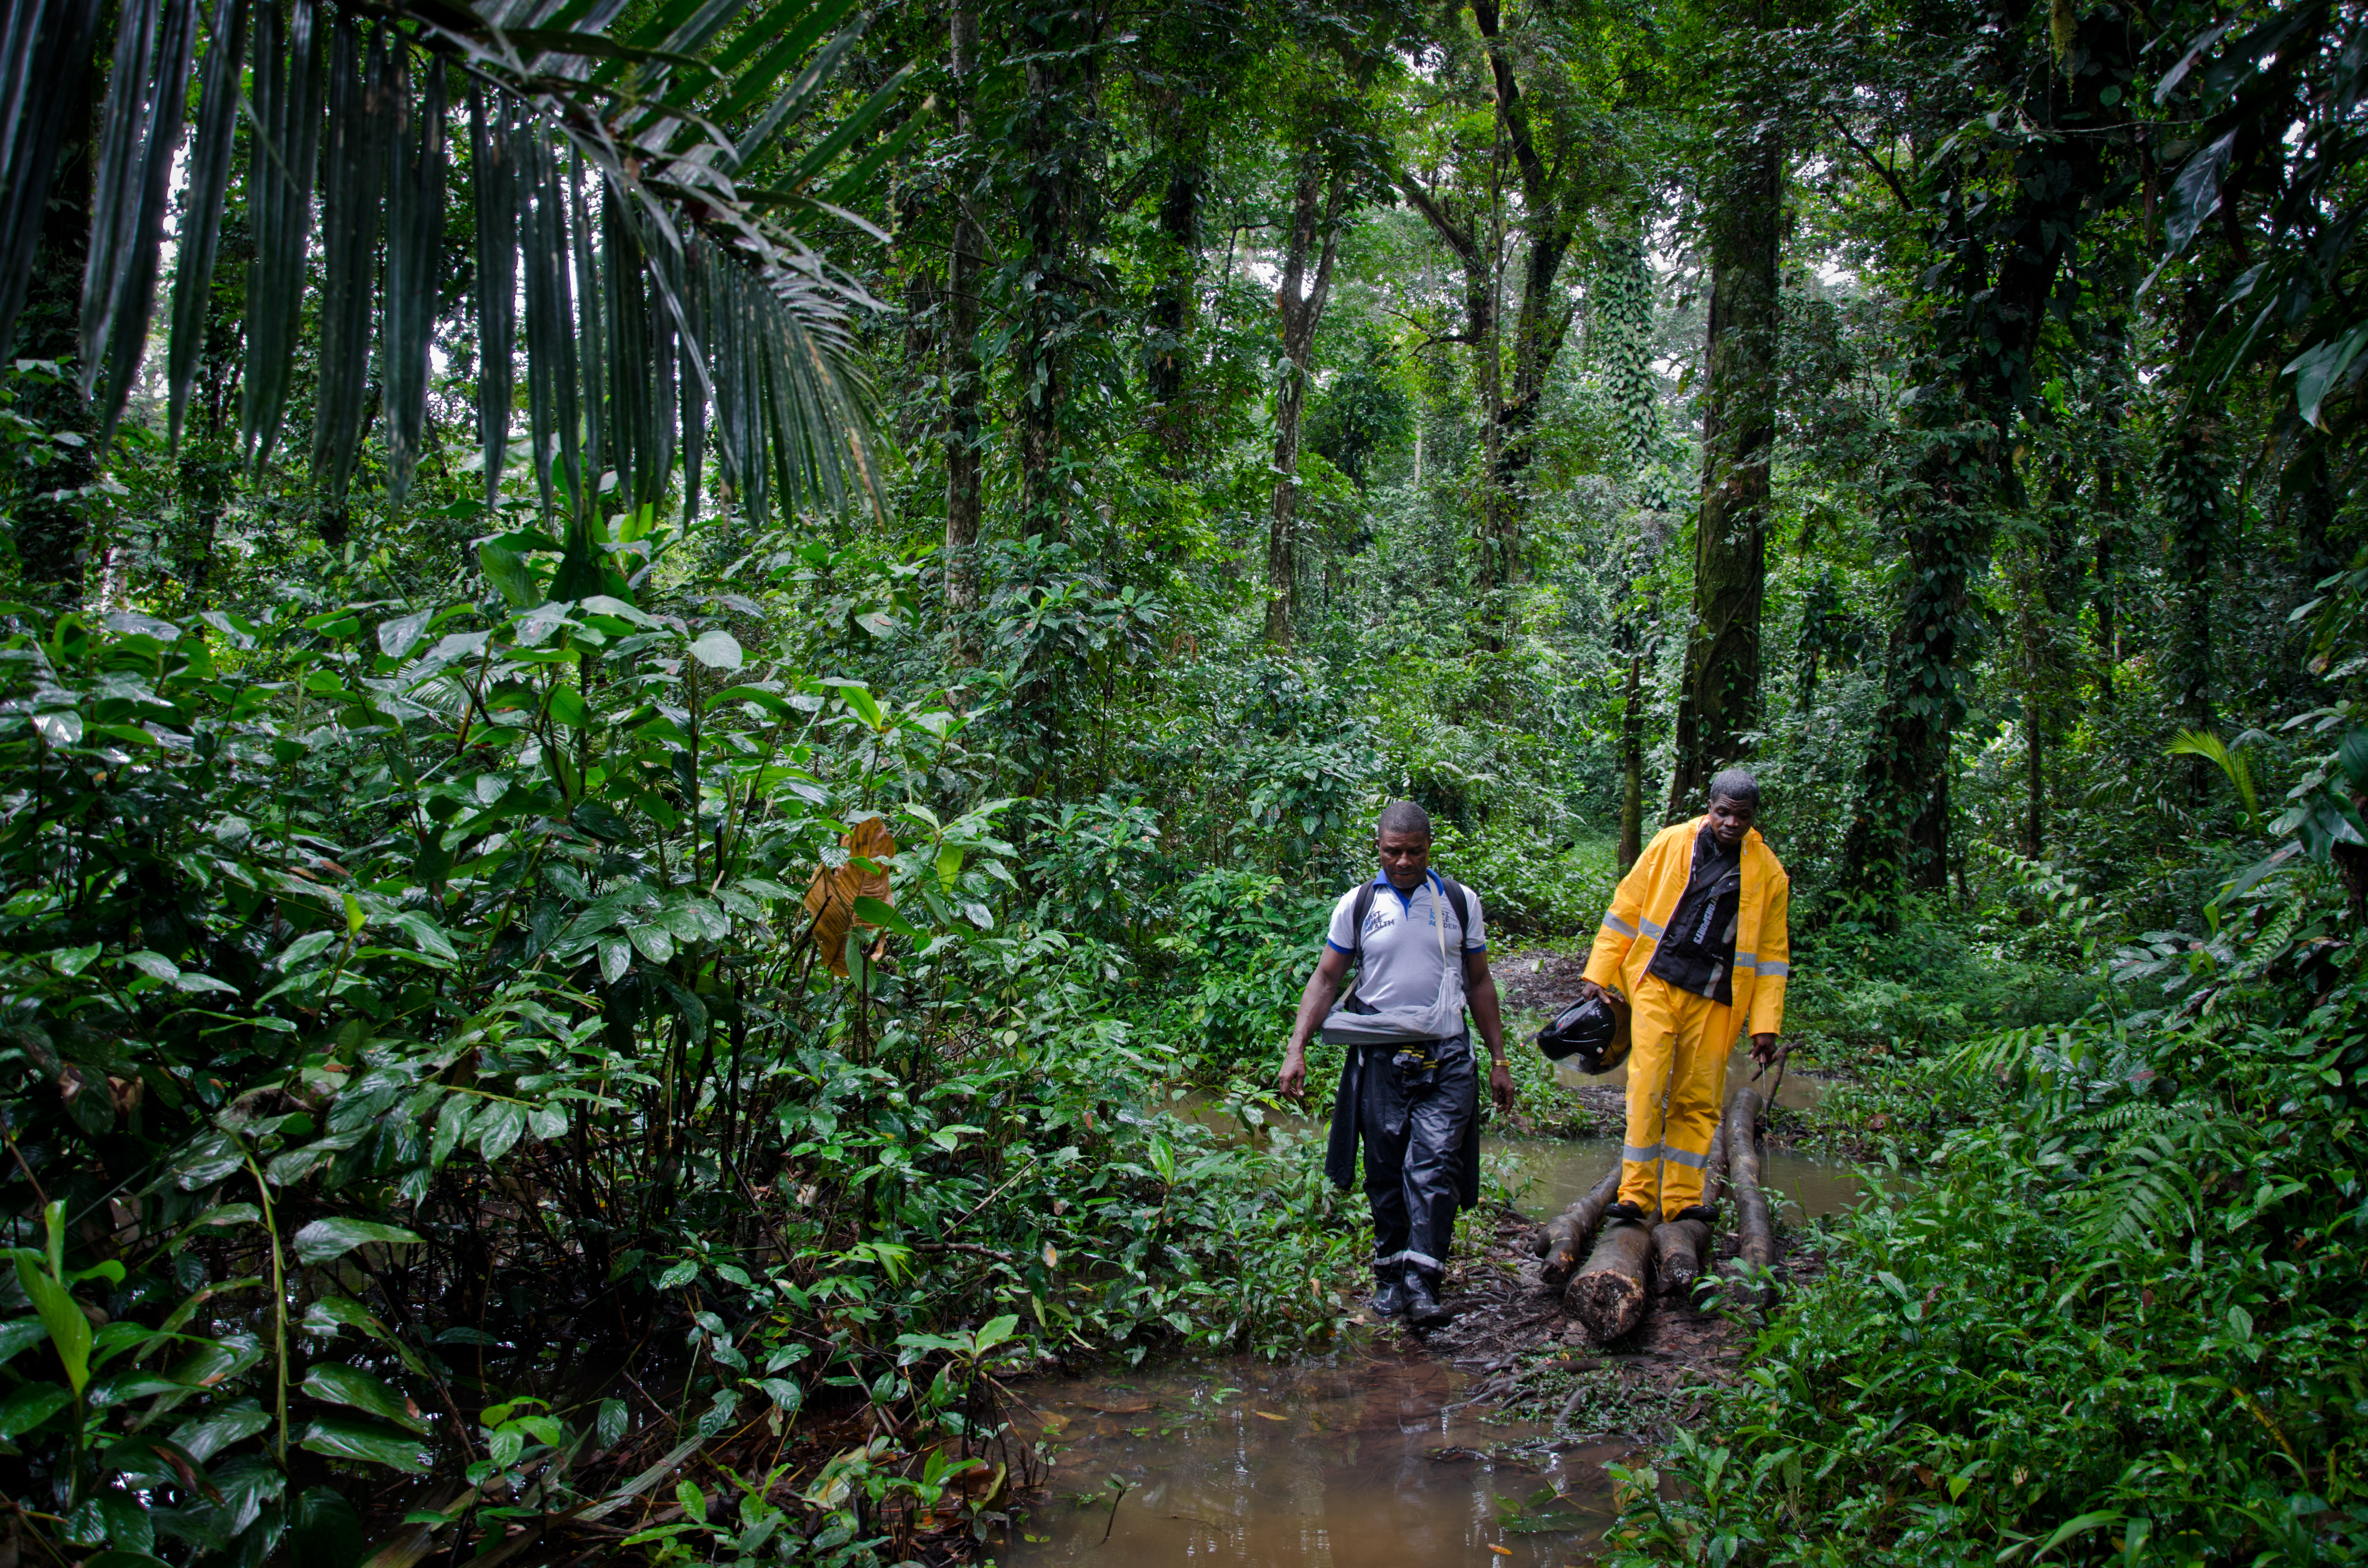 Reaching remote communities in Grand Gedeh County, Liberia, often involves long hikes or traveling by motorbike. Last Mile Health trains community health workers to serve these remote areas. Photo: Courtesy of Last Mile Health